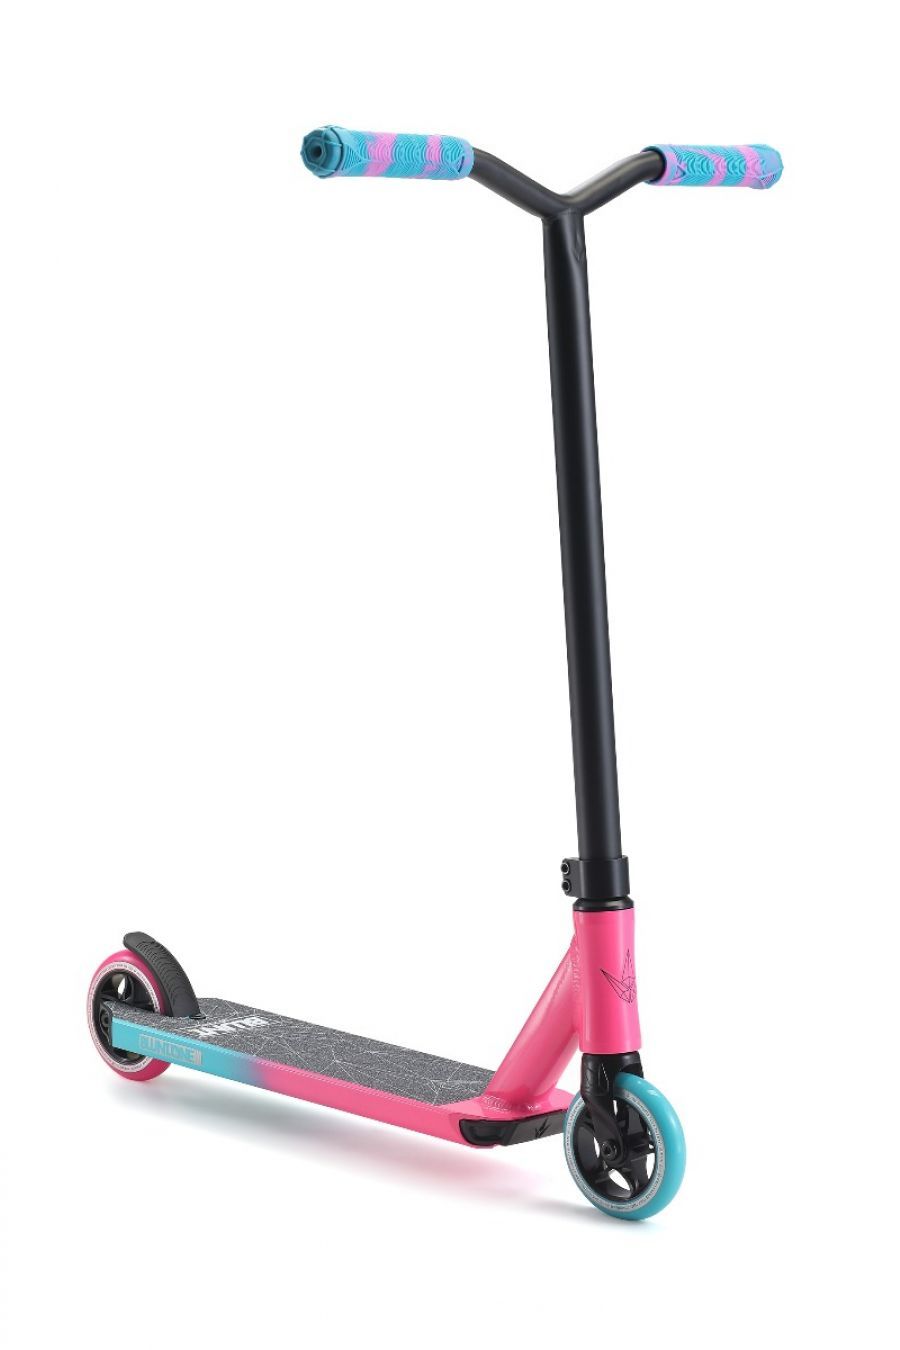 Trottinette Complete One S3 - Pink Teal